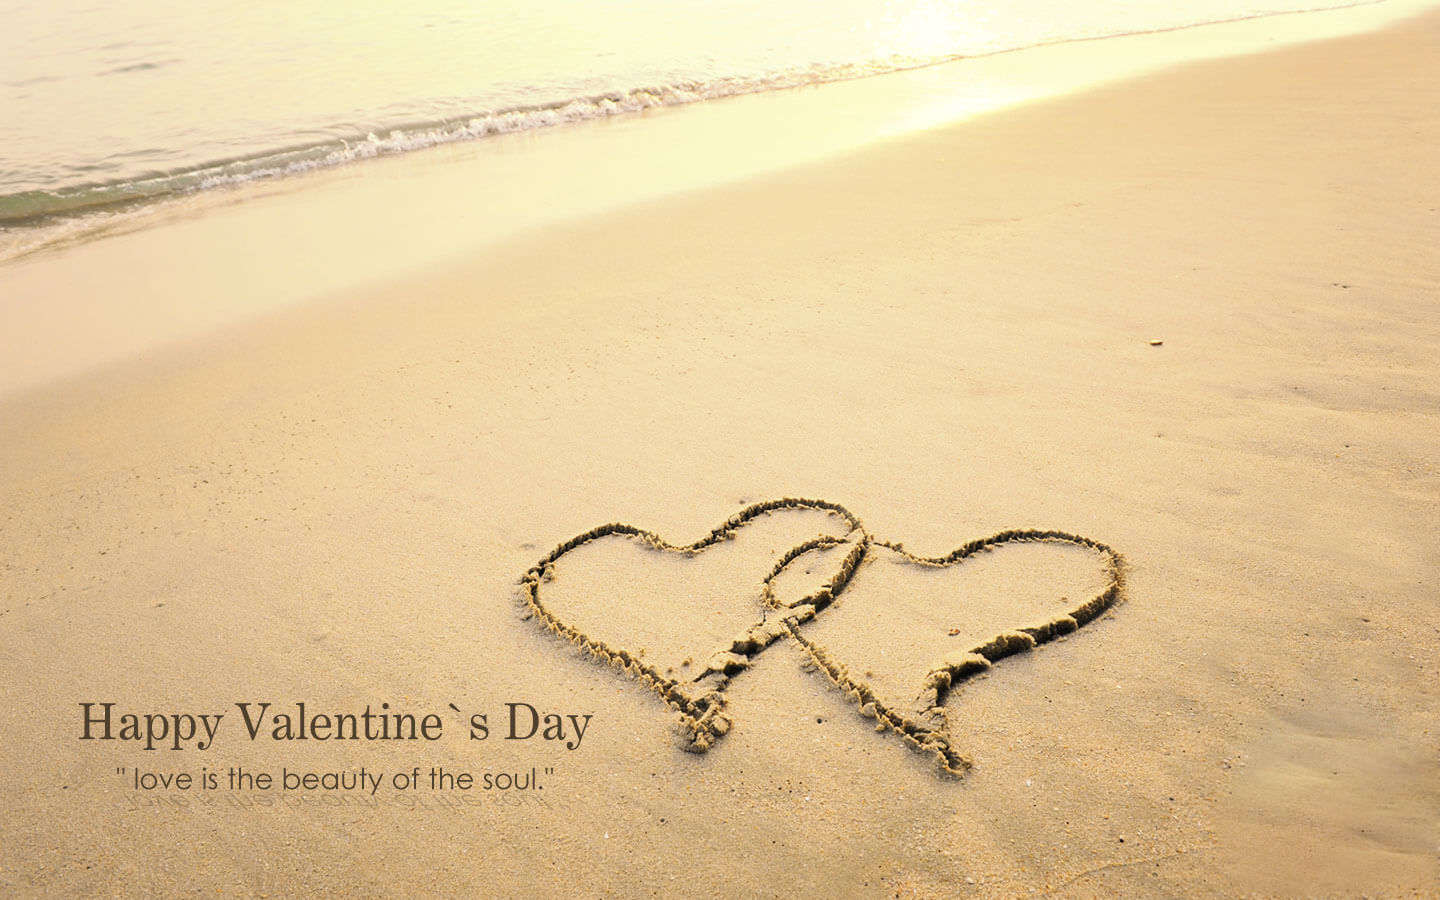 Happy Valentines Day 2019 Two Heart At Beach Wallpaper Image